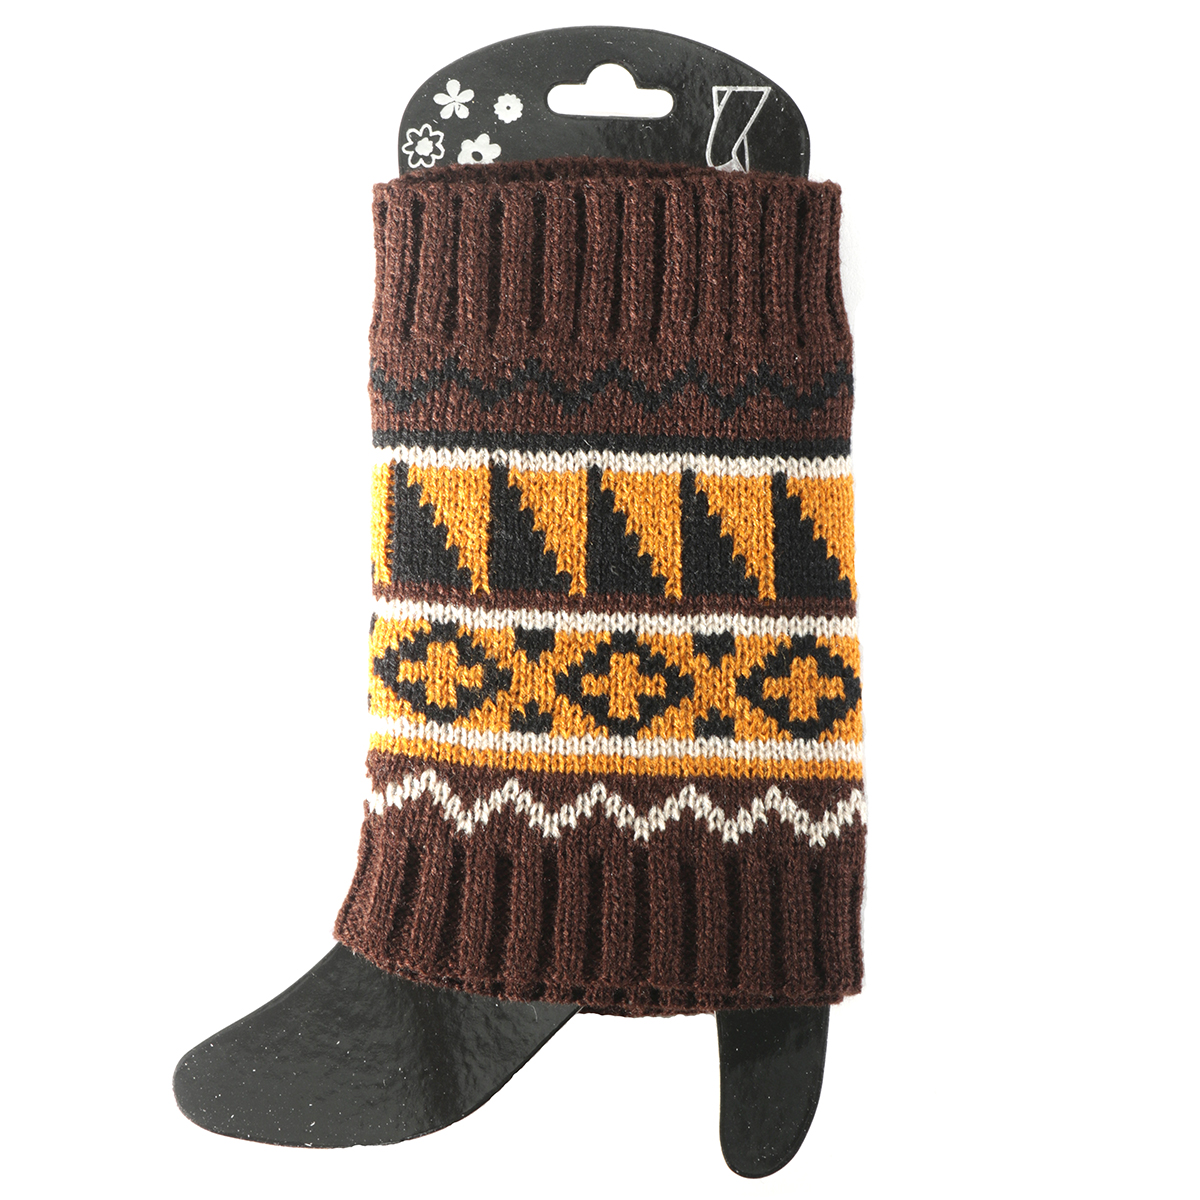 BR/OR SWEATER BOOT CUFF Short